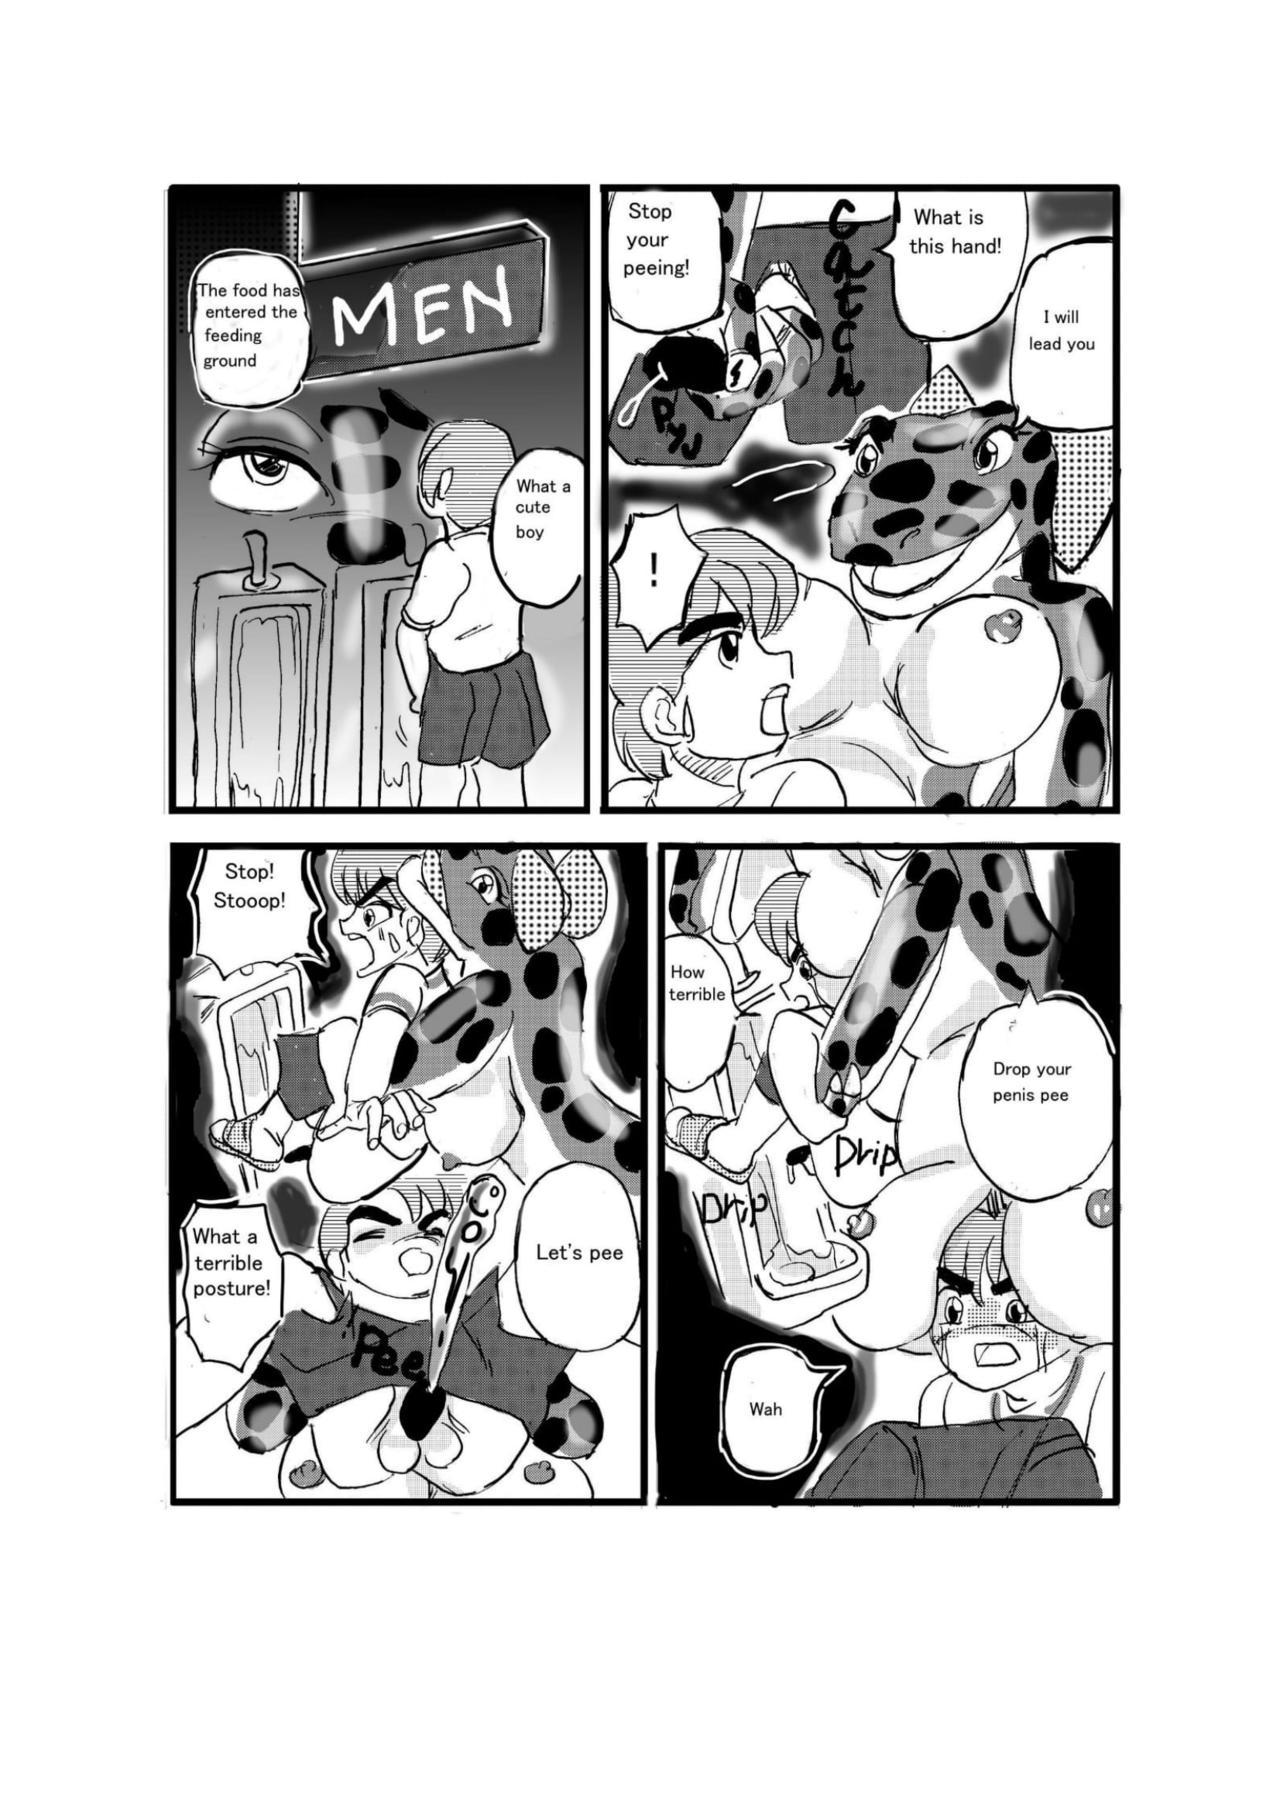 Ass Fetish Swallowed Whole vol.2 Waniko + What's Digestion? - Original Lips - Page 3